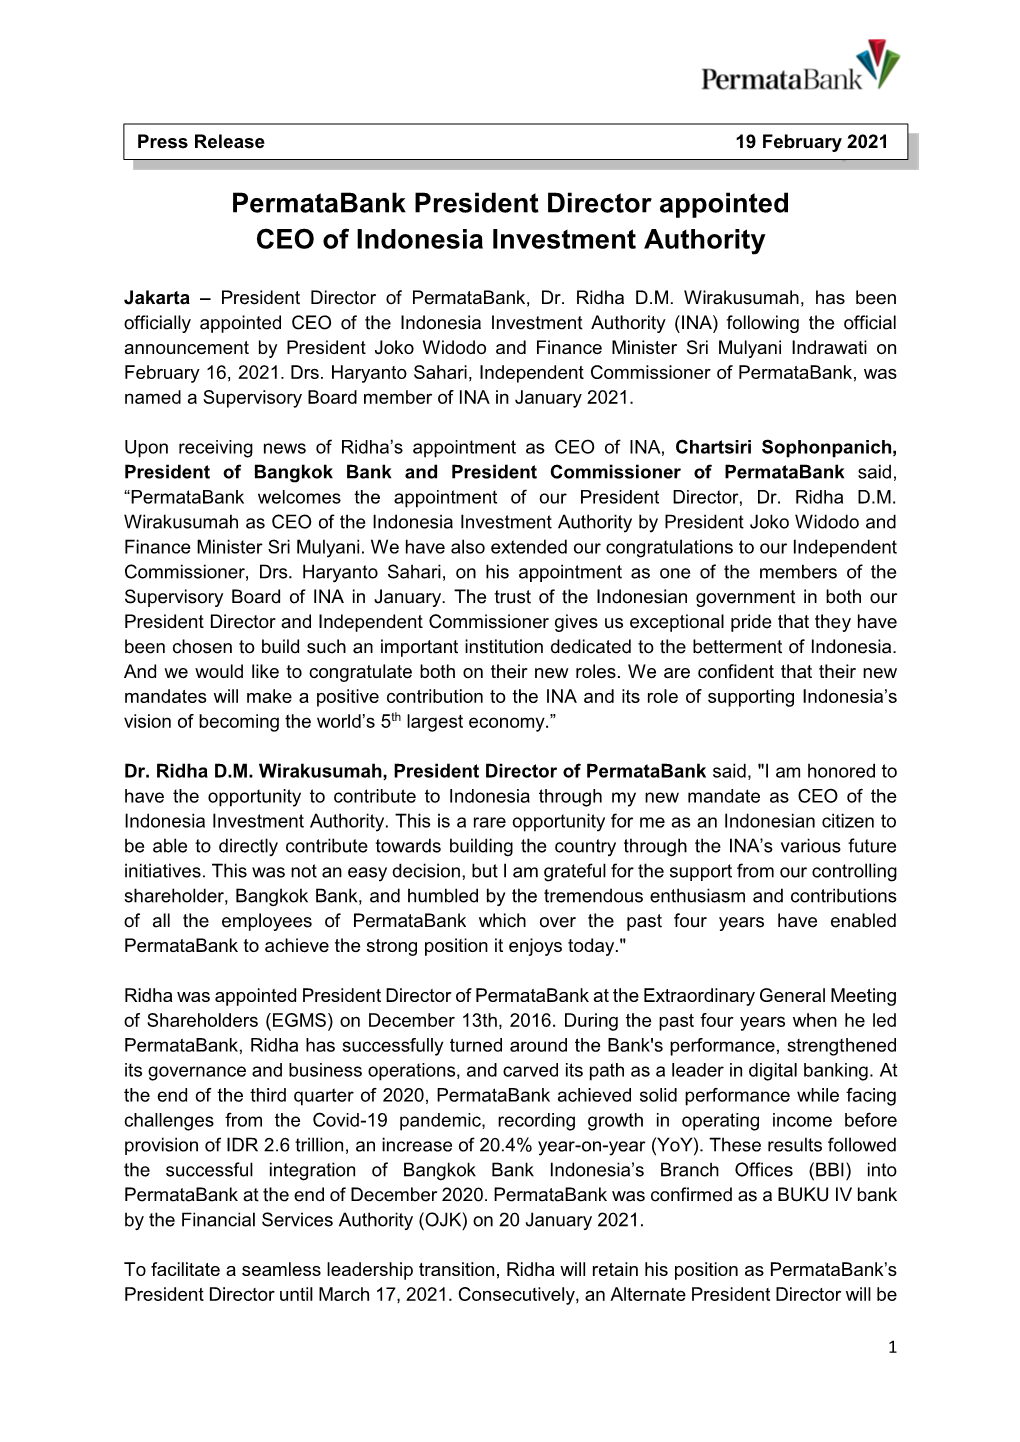 Permatabank President Director Appointed CEO of Indonesia Investment Authority